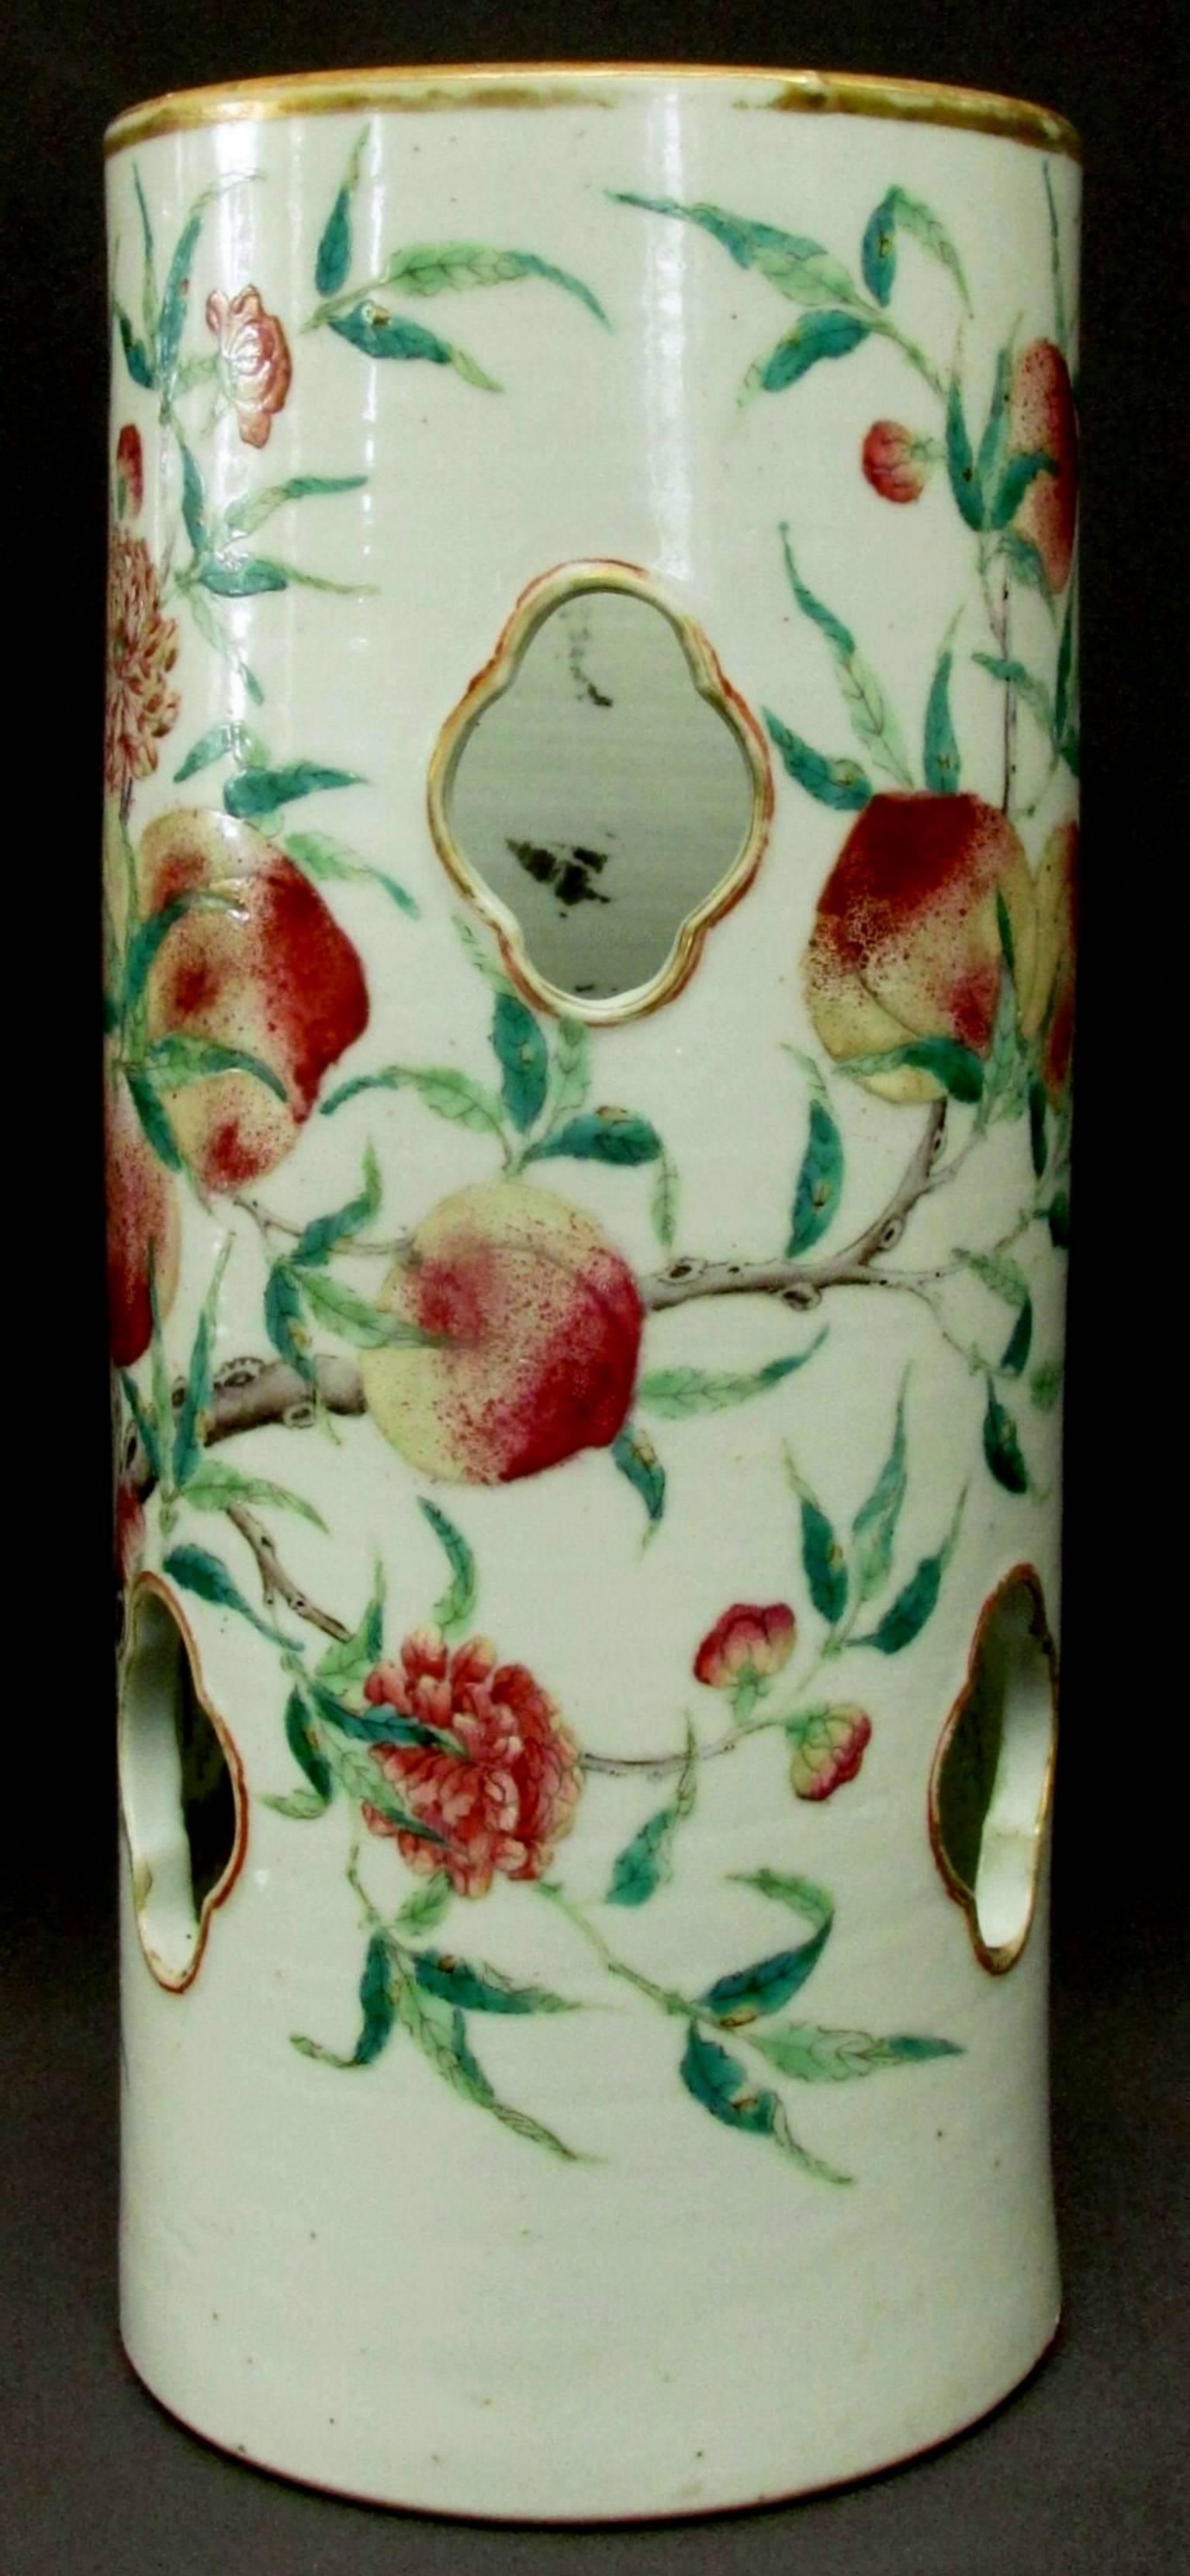 The pierced cylindrical body decorated with enamels showing leafy branches with peach clusters and fruit blossoms. Iron red seal script mark and wax export approval seal on underside, remnants of an old paper label affixed to rim.

International